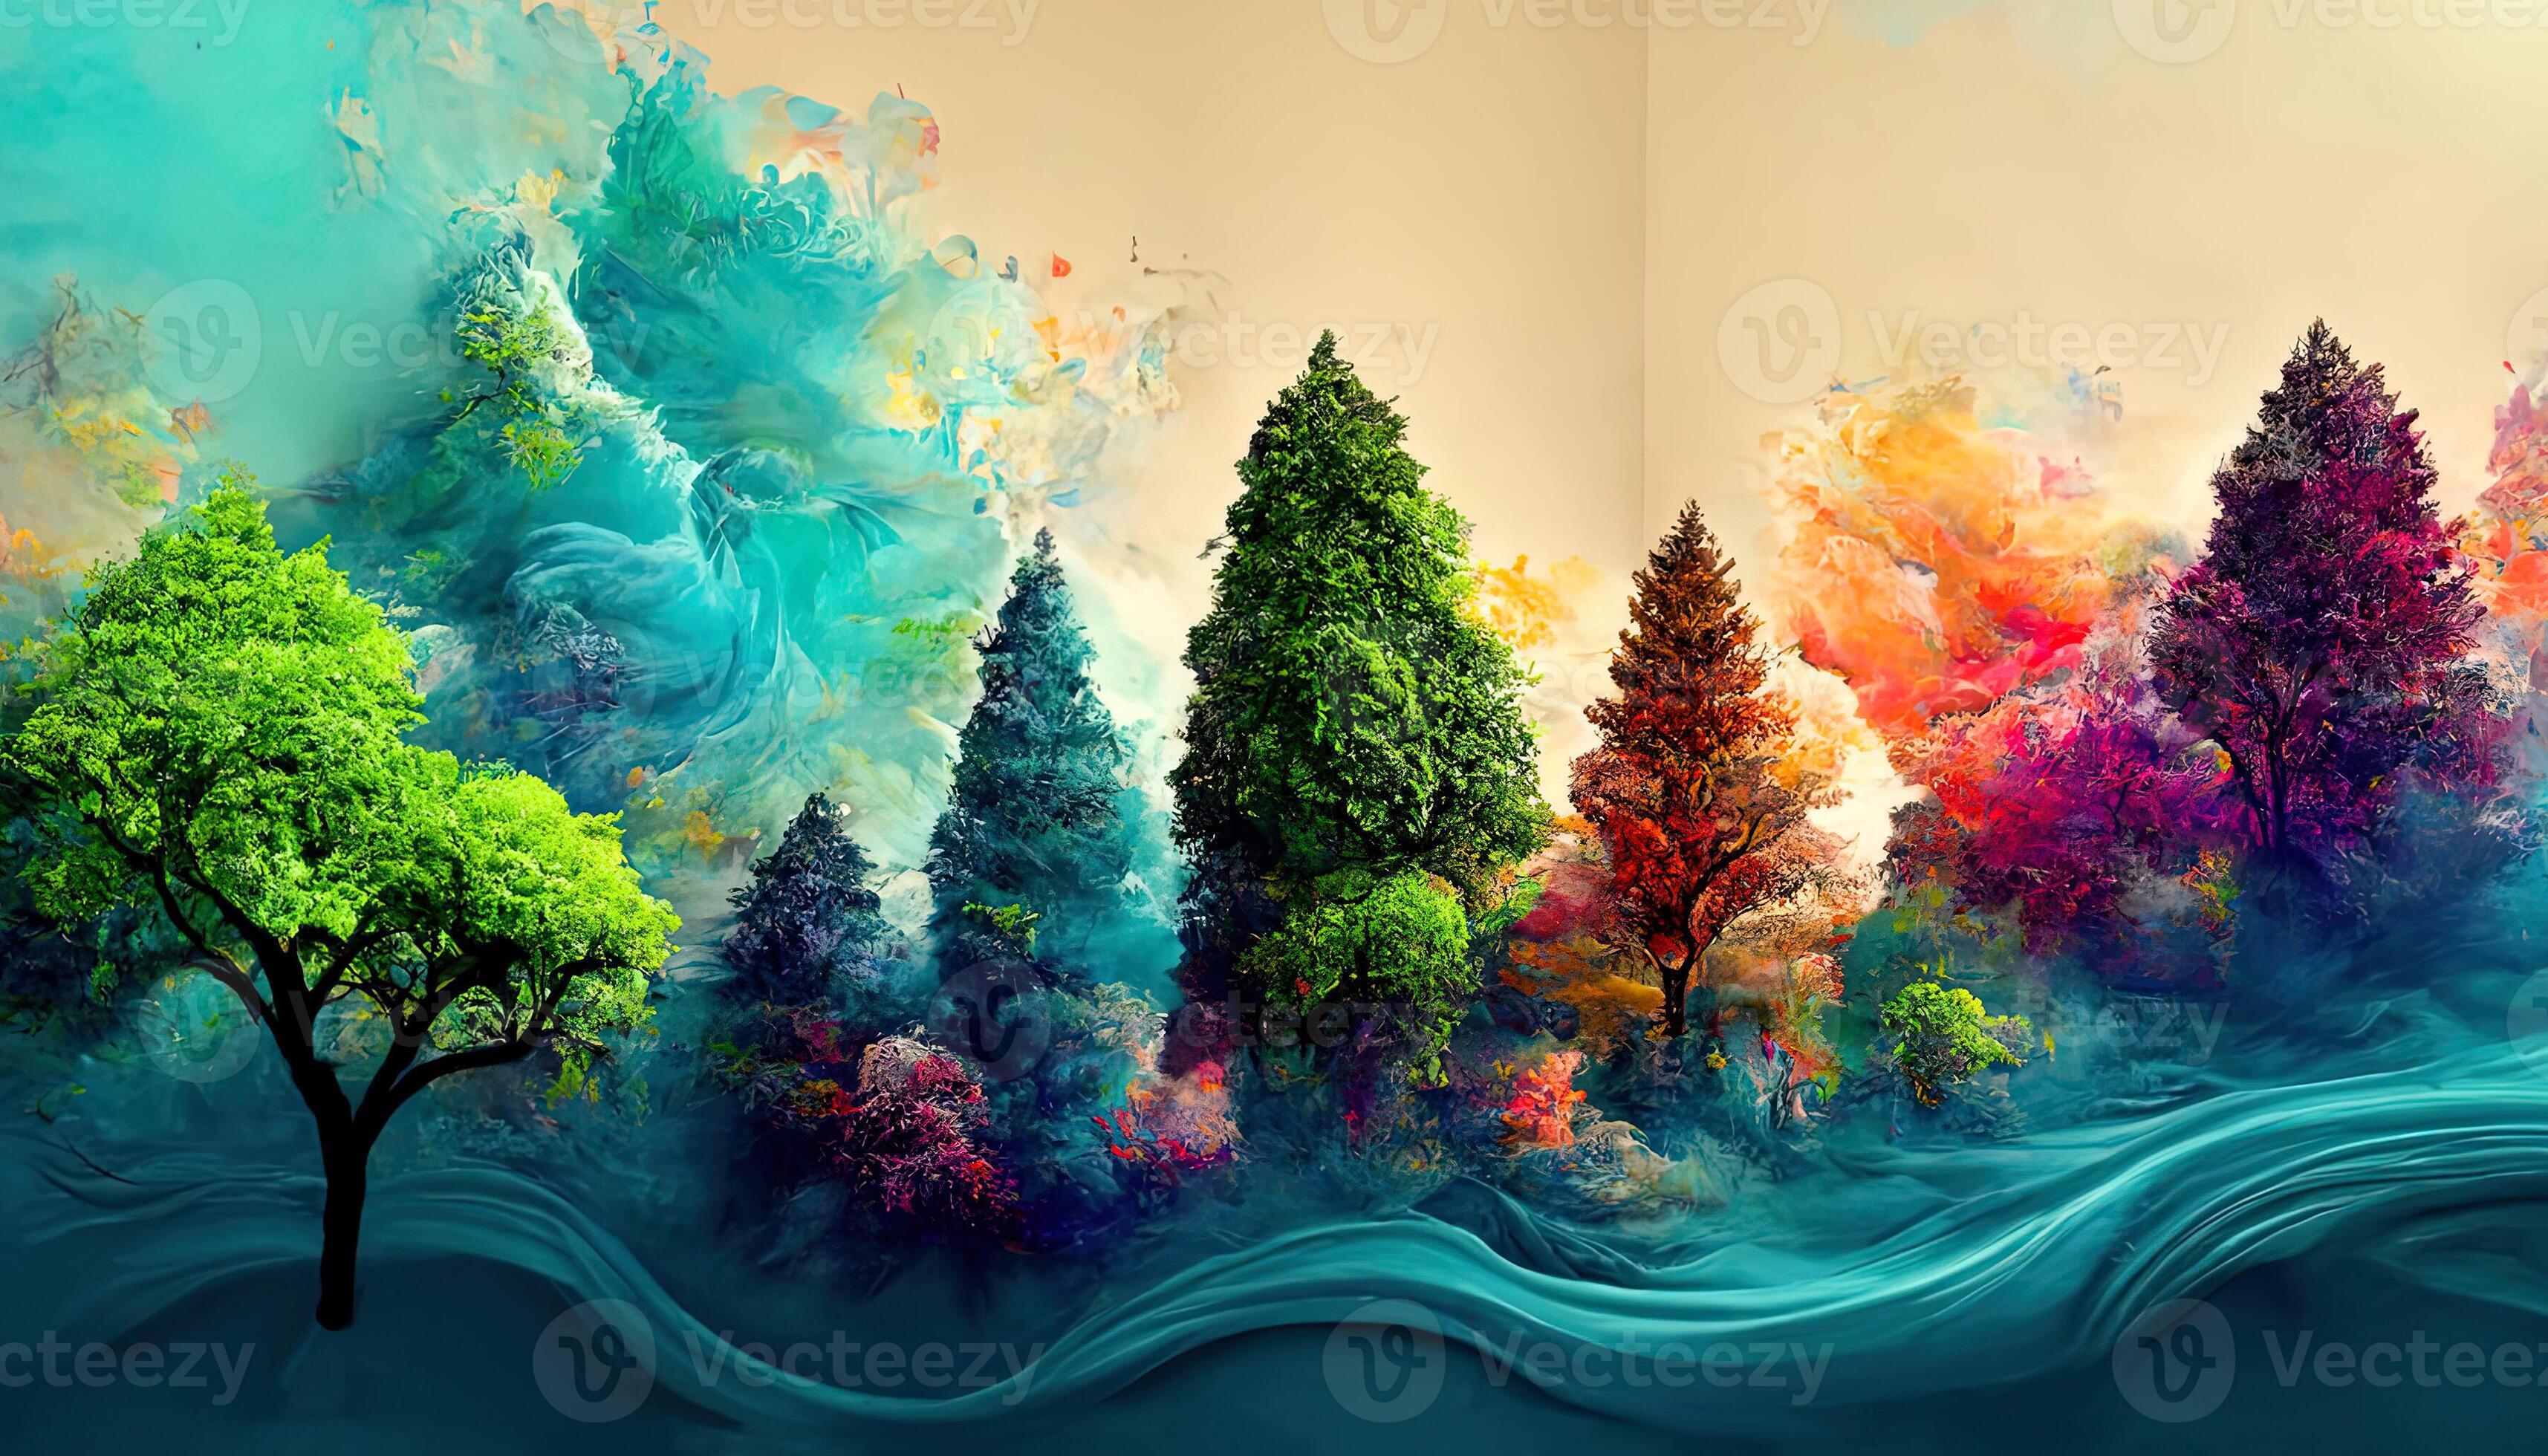 Oil Painting wallpaper for walls | Best Quality Wallpaper with amazing  design at Low Price